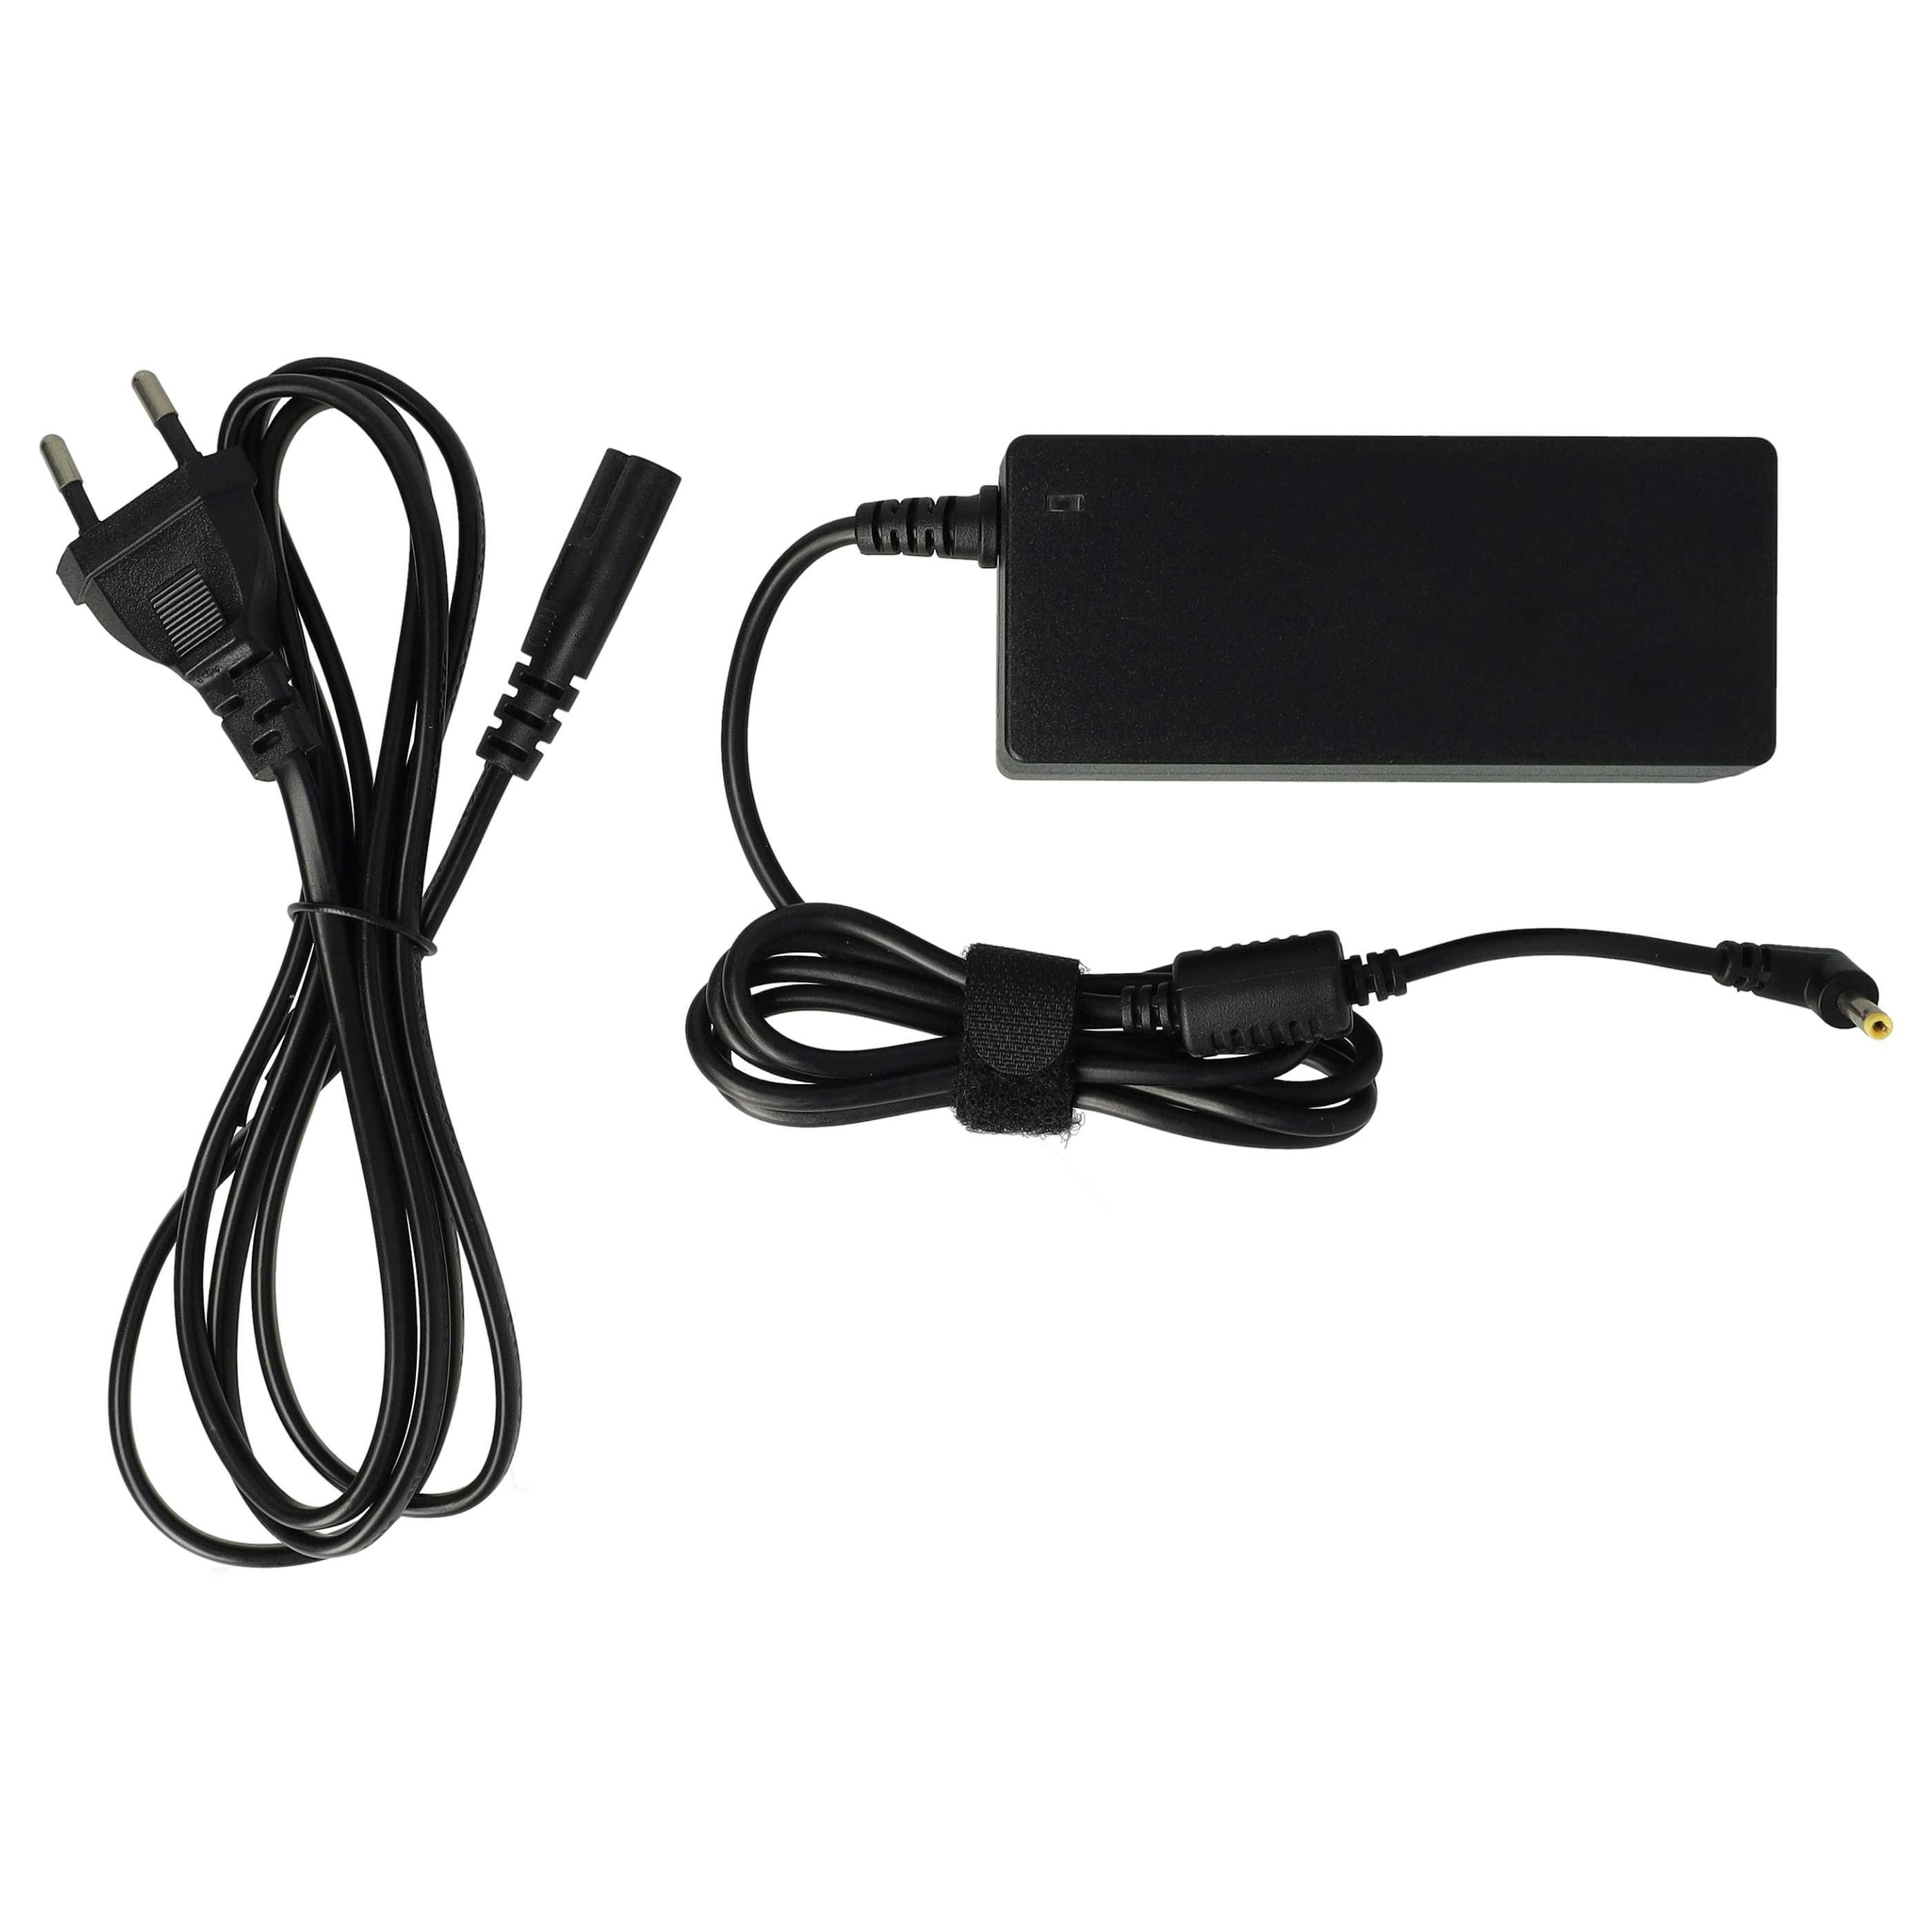 Mains Power Adapter replaces Lenovo 5A10H42926, 5A10H4362, 5A10H42921, 5A10H42923 for LenovoNotebook